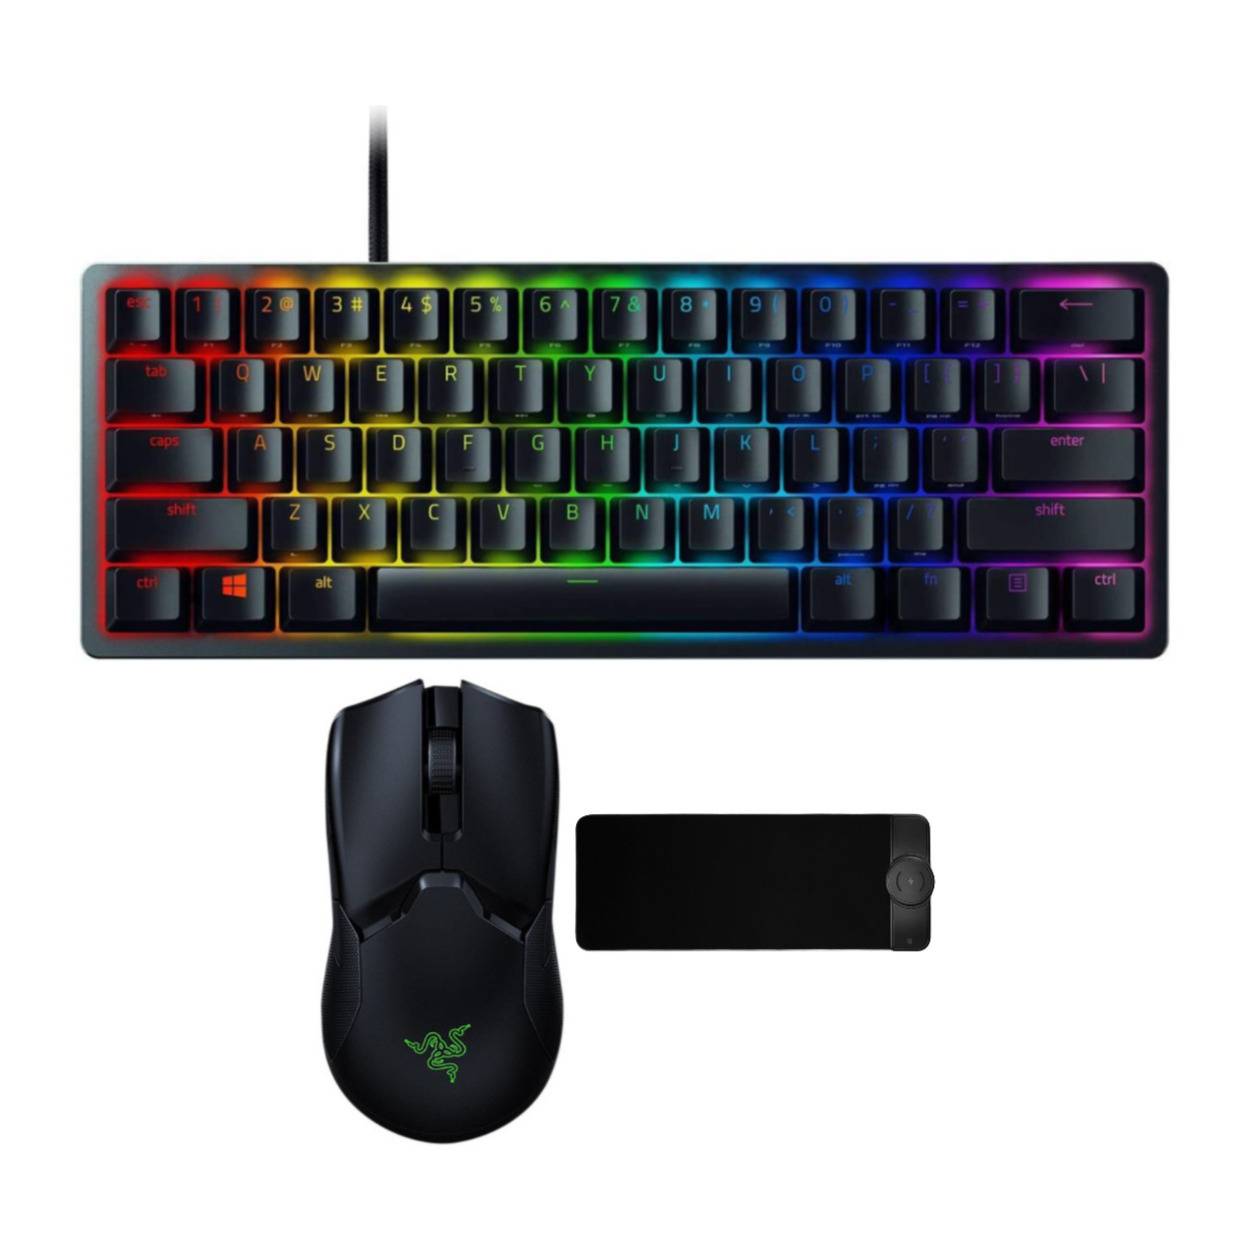 Razer Viper Ultimate Wireless Optical Gaming Mouse with Gaming Keyboard and RGB Mouse Pad Bundle